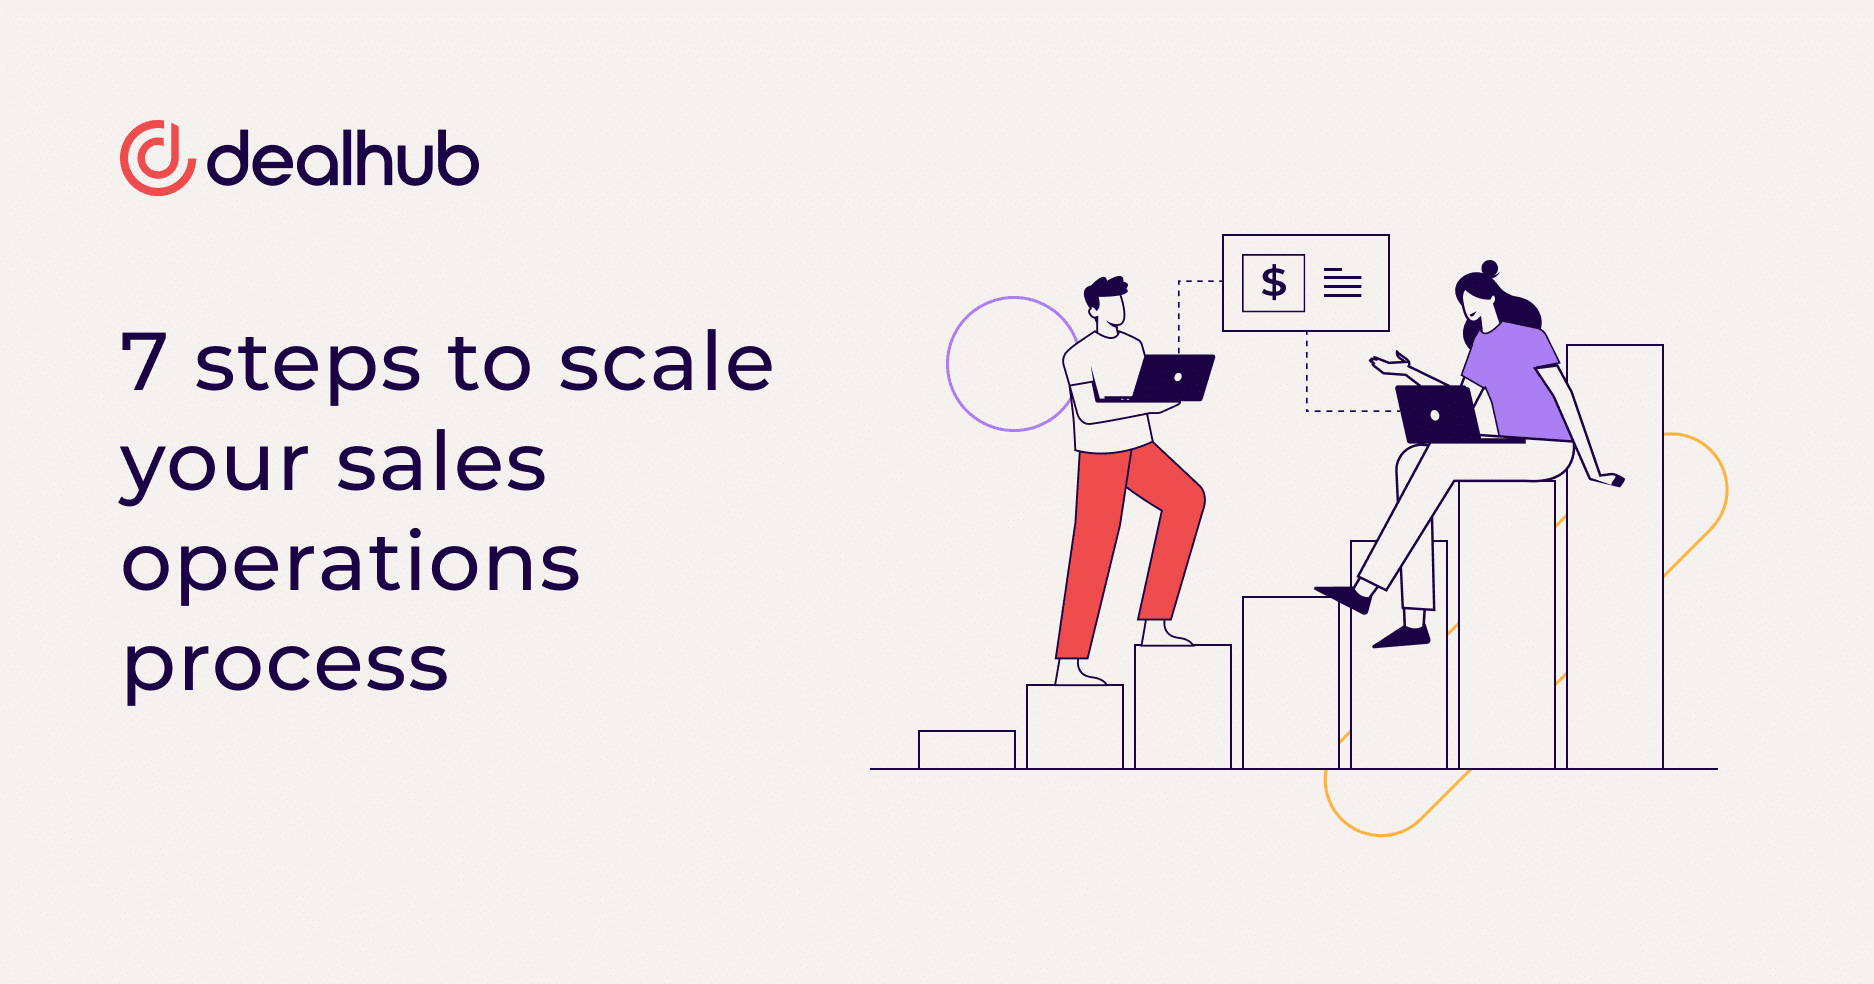 7 steps to scale your sales operations process